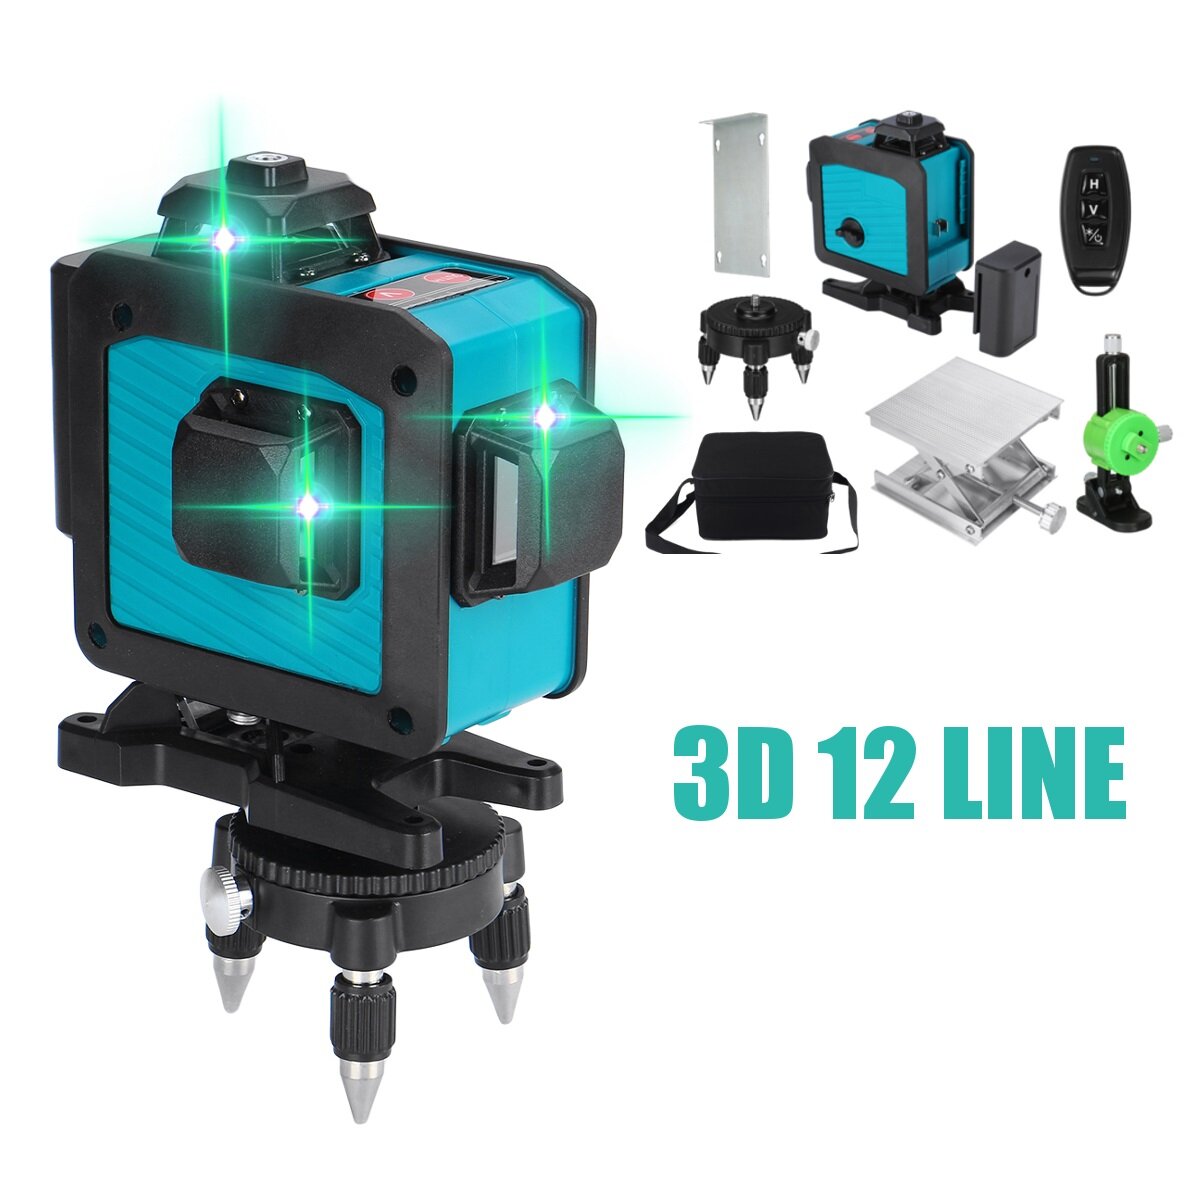 12 Line Green Laser Level Self Leveling 360° Rotary Cross Auto & Remote Control